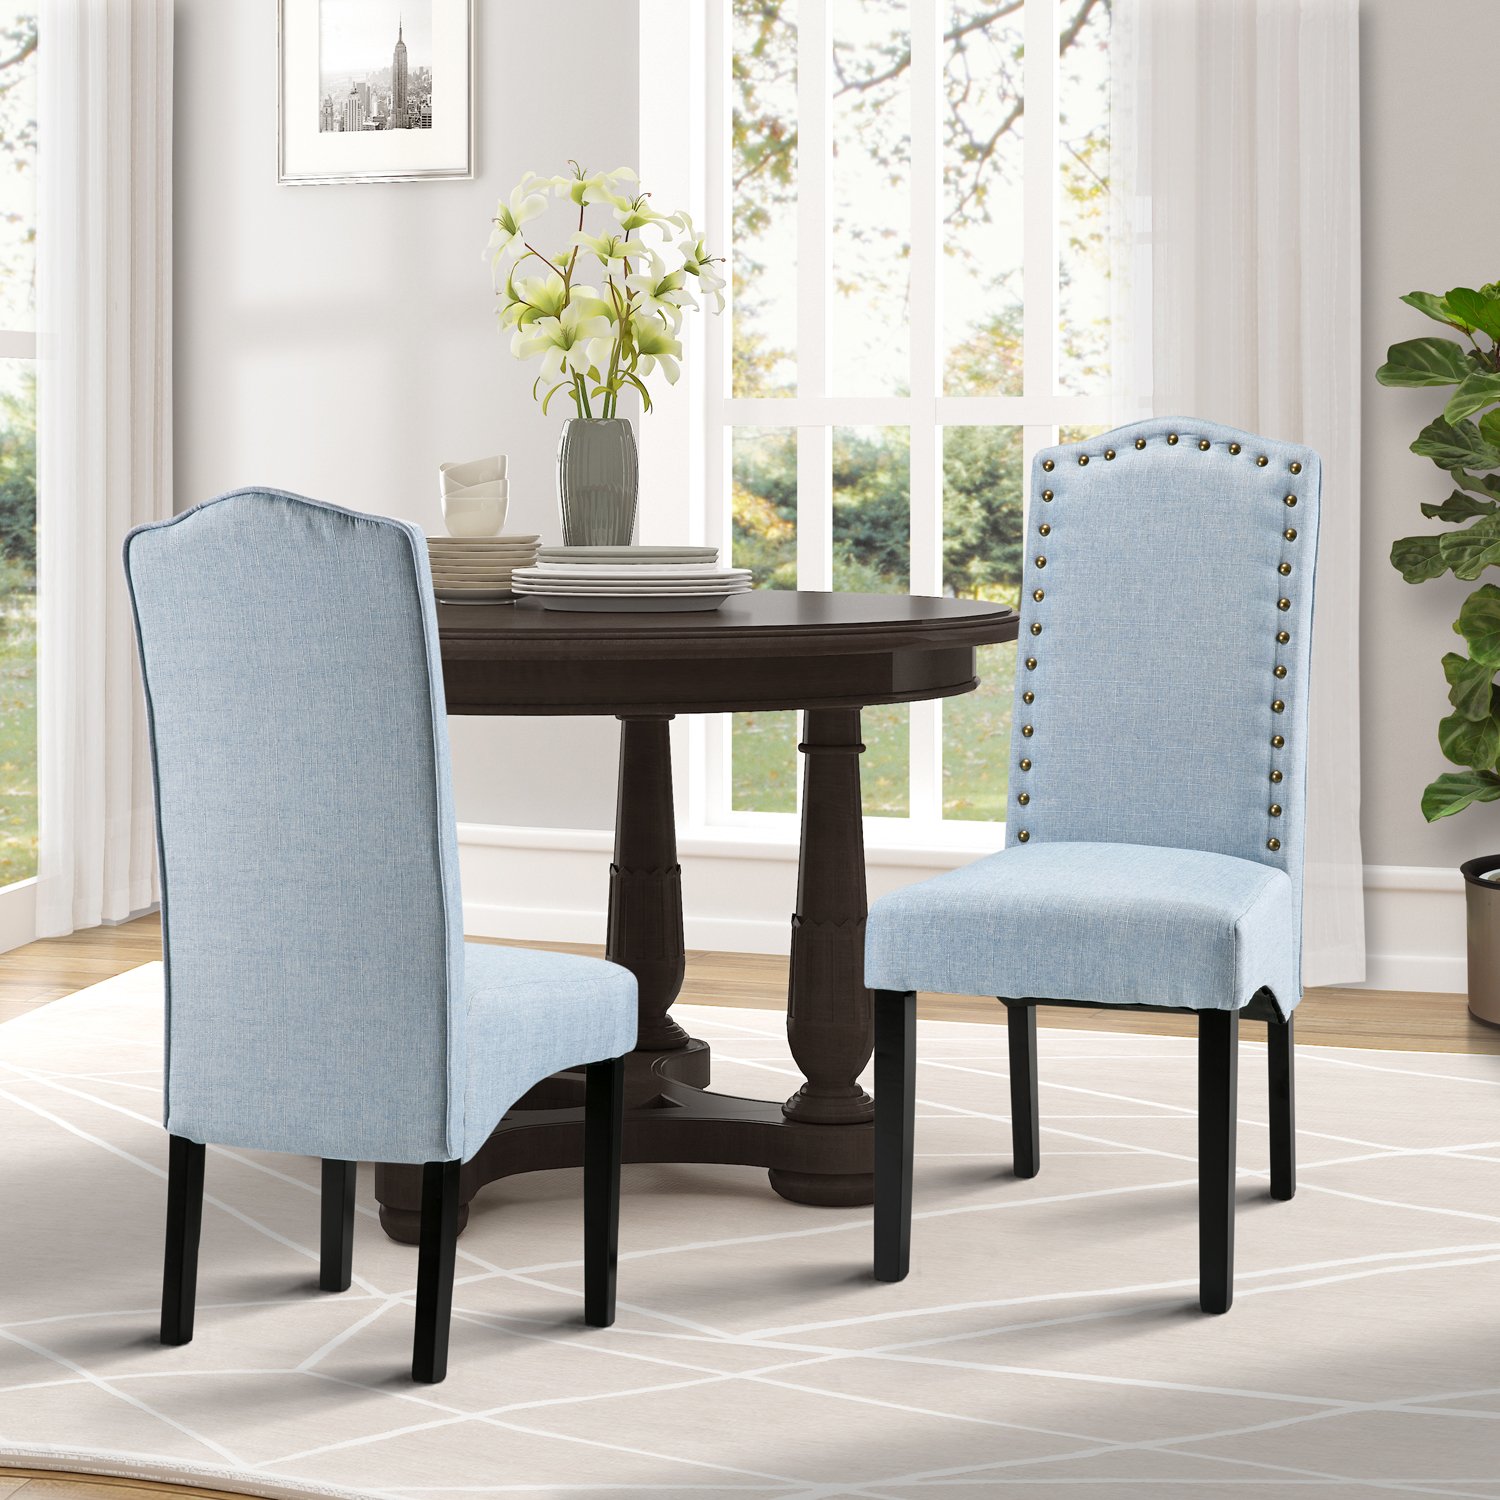 merax fabric accent chair dining room with solid table chairs wood legs set light blue round metal coffee big umbrella wide door threshold home goods sets patio furniture side